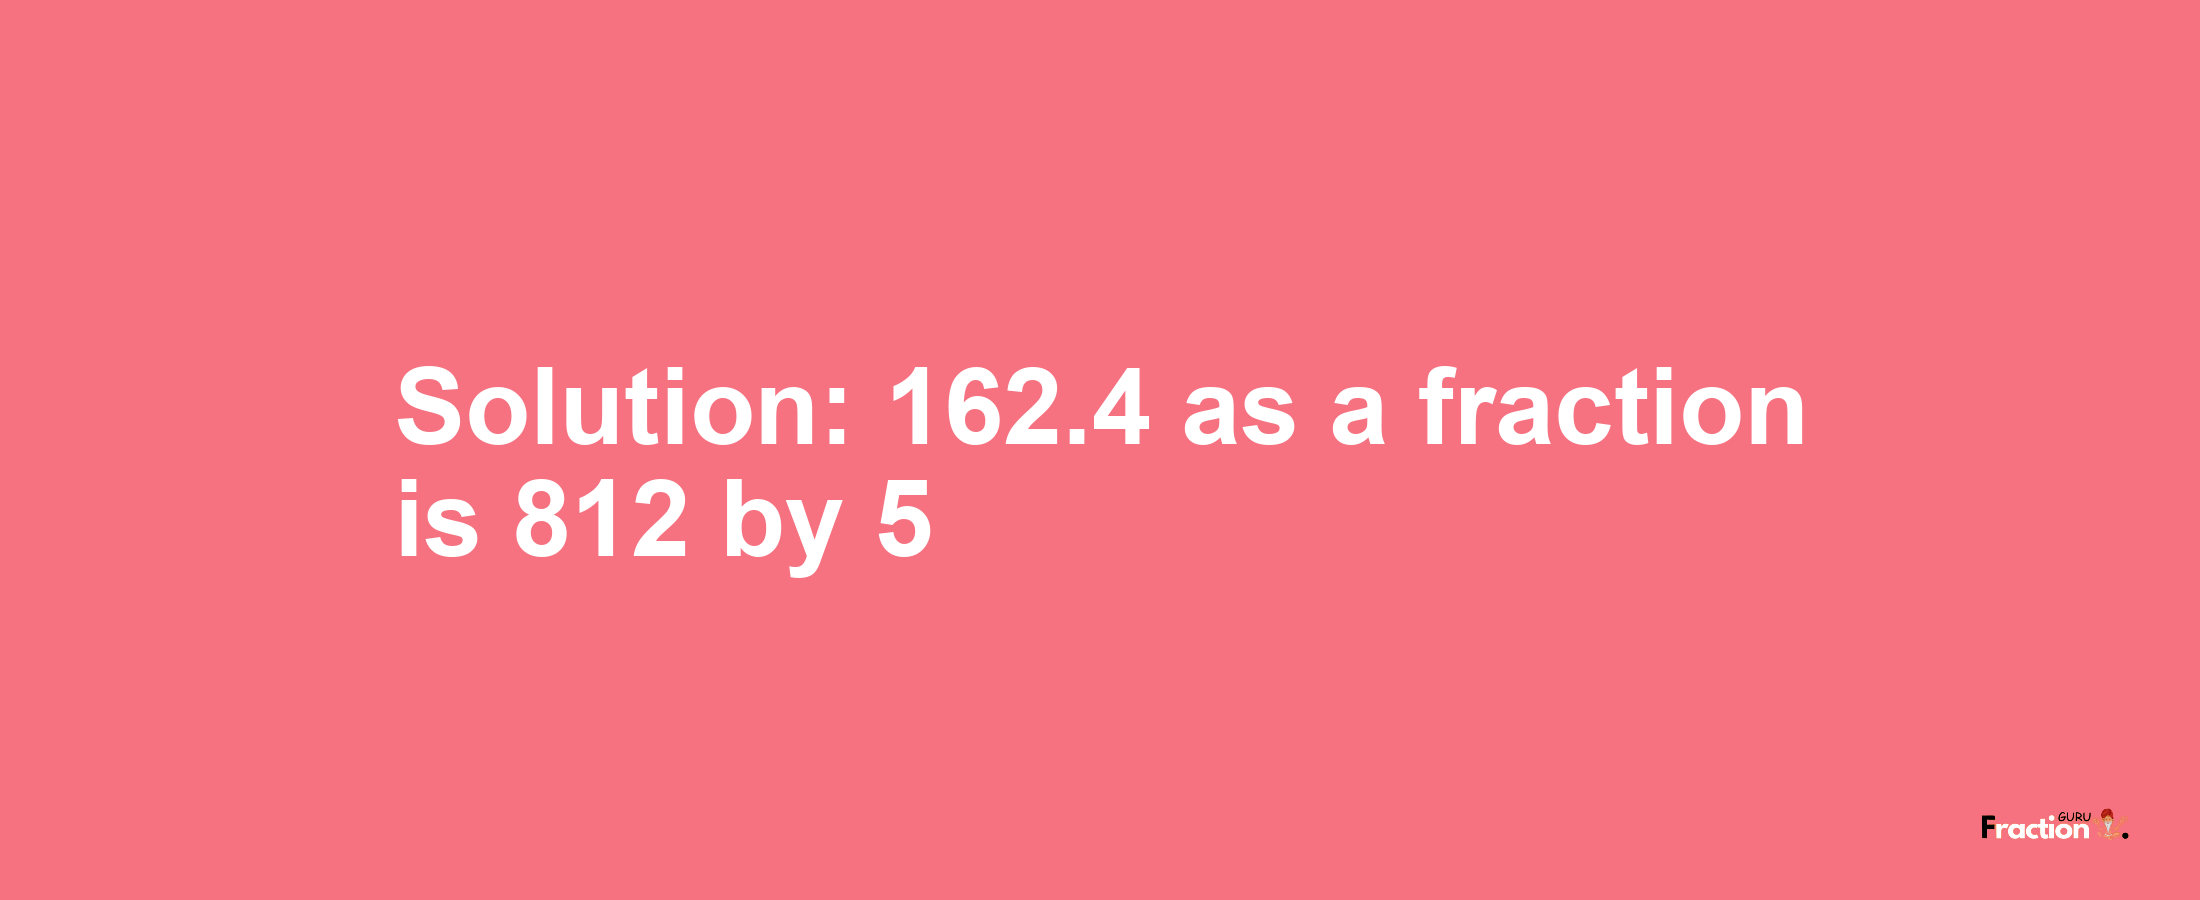 Solution:162.4 as a fraction is 812/5